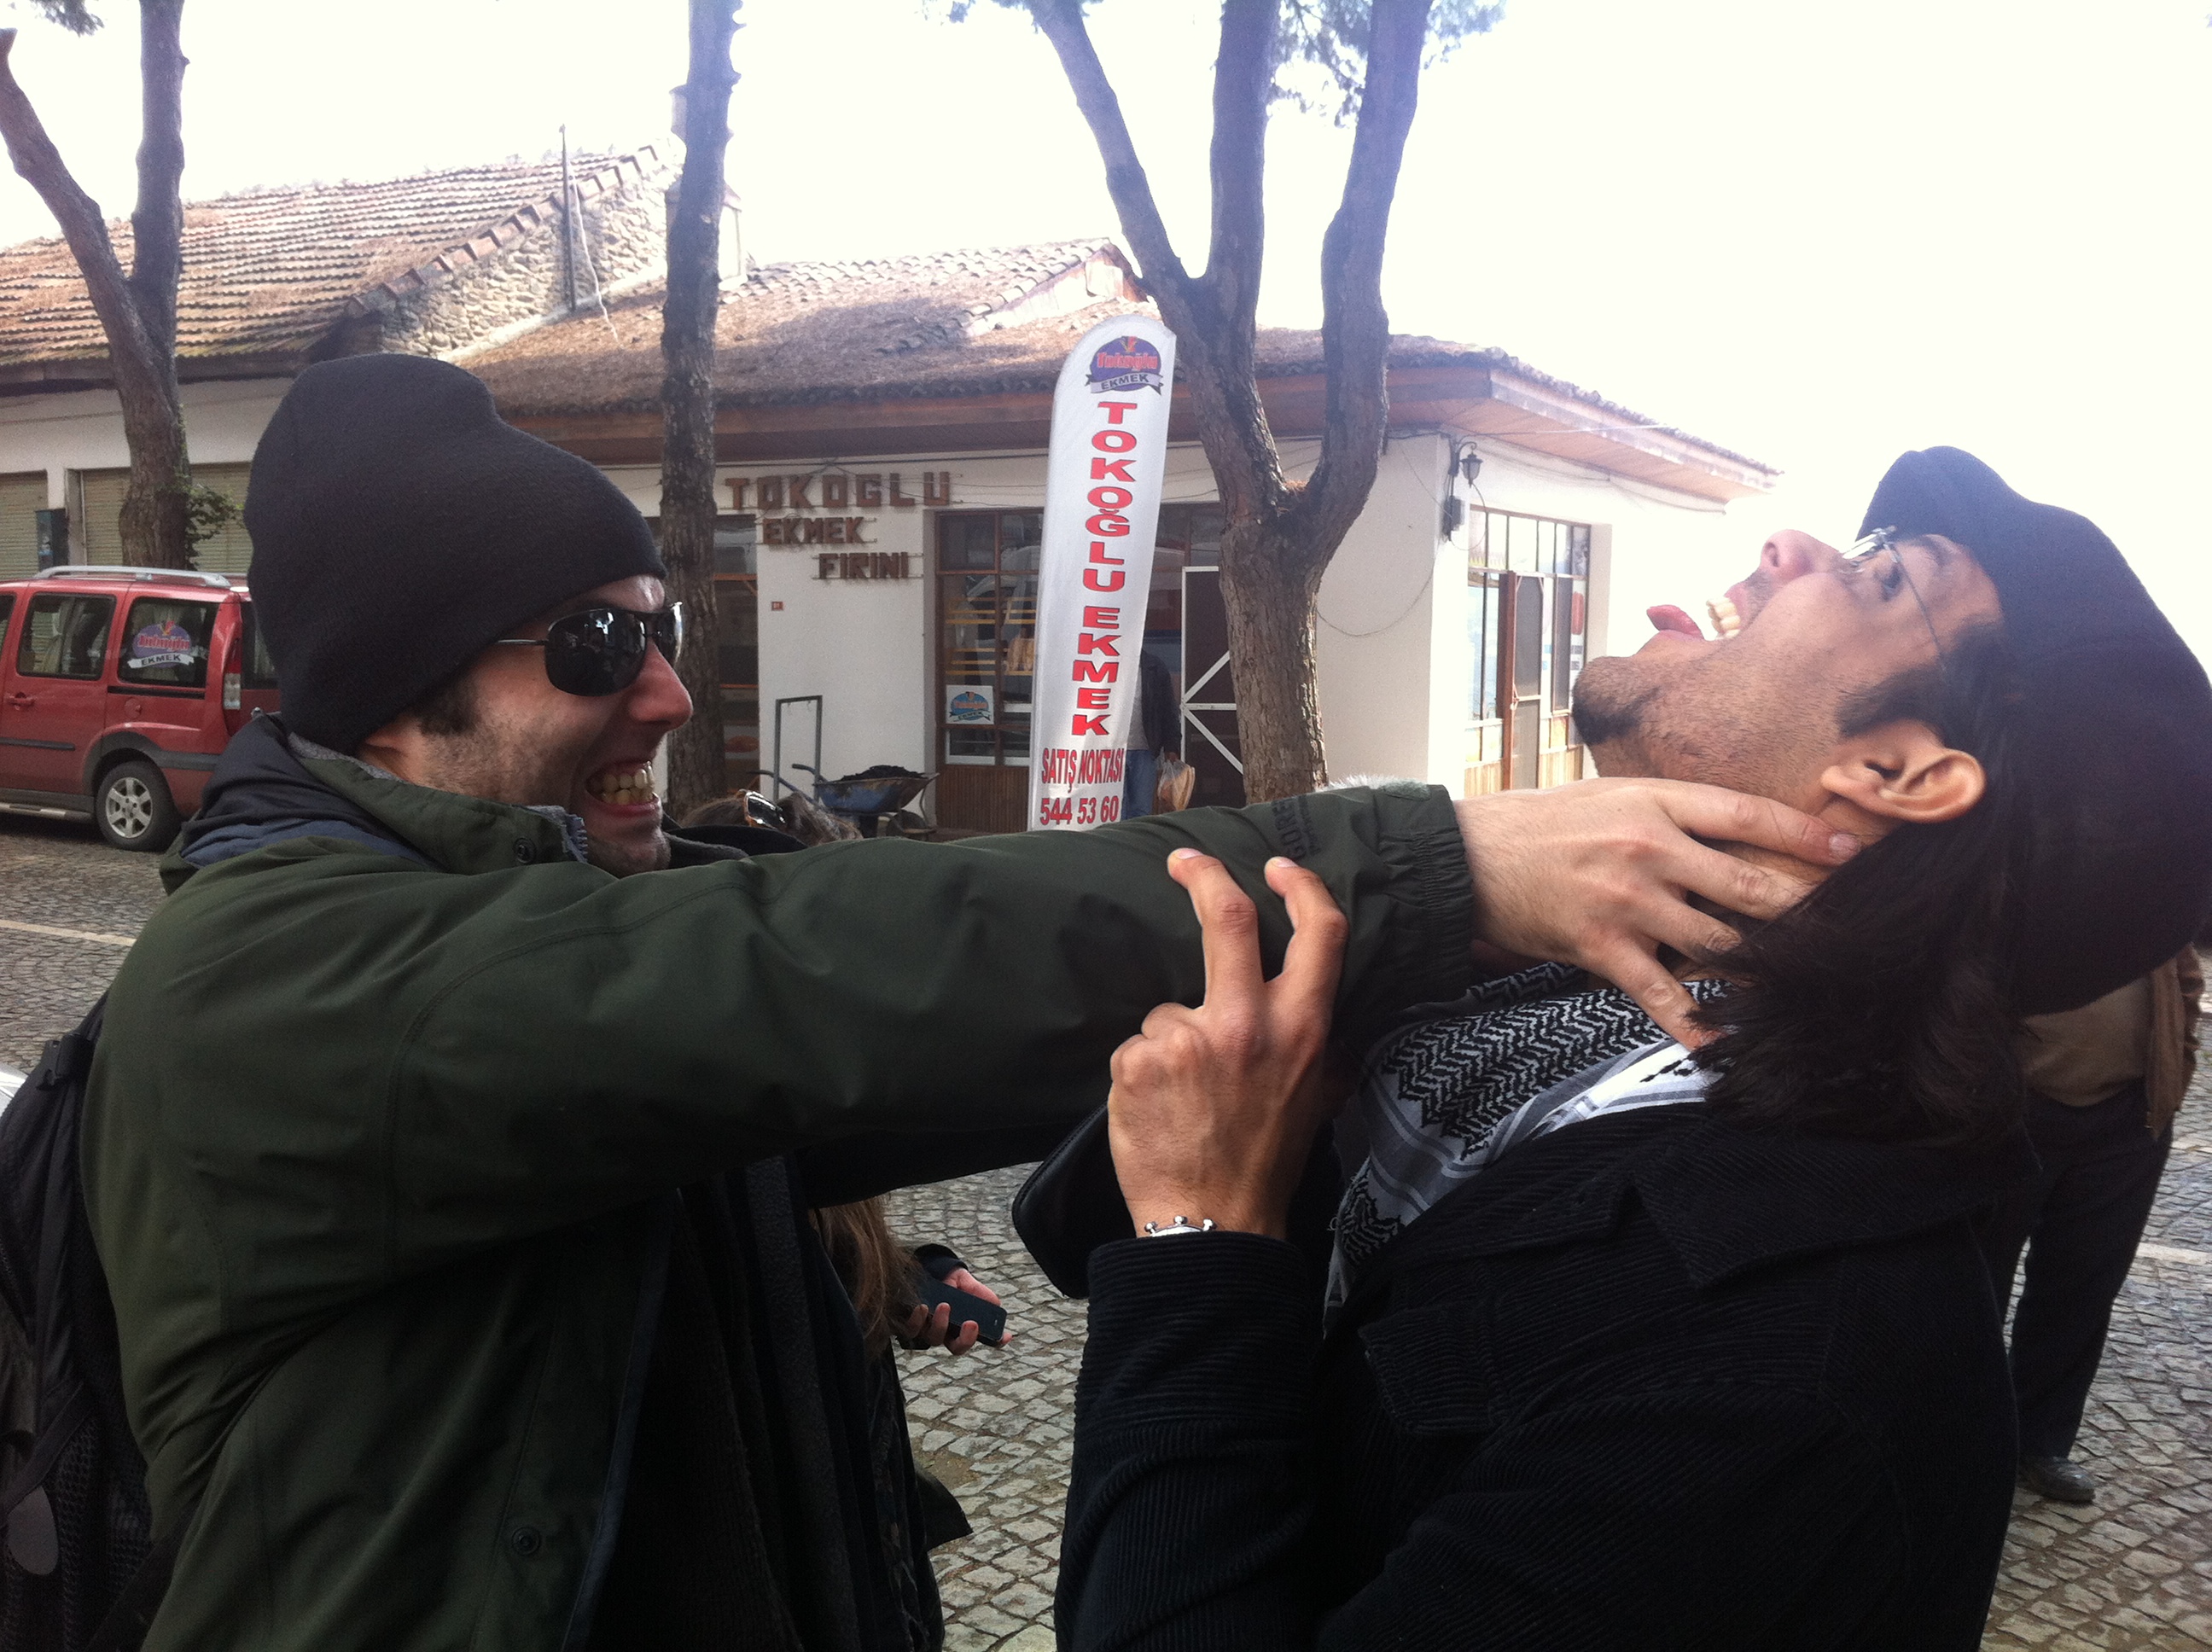 The producer and director relationship on set